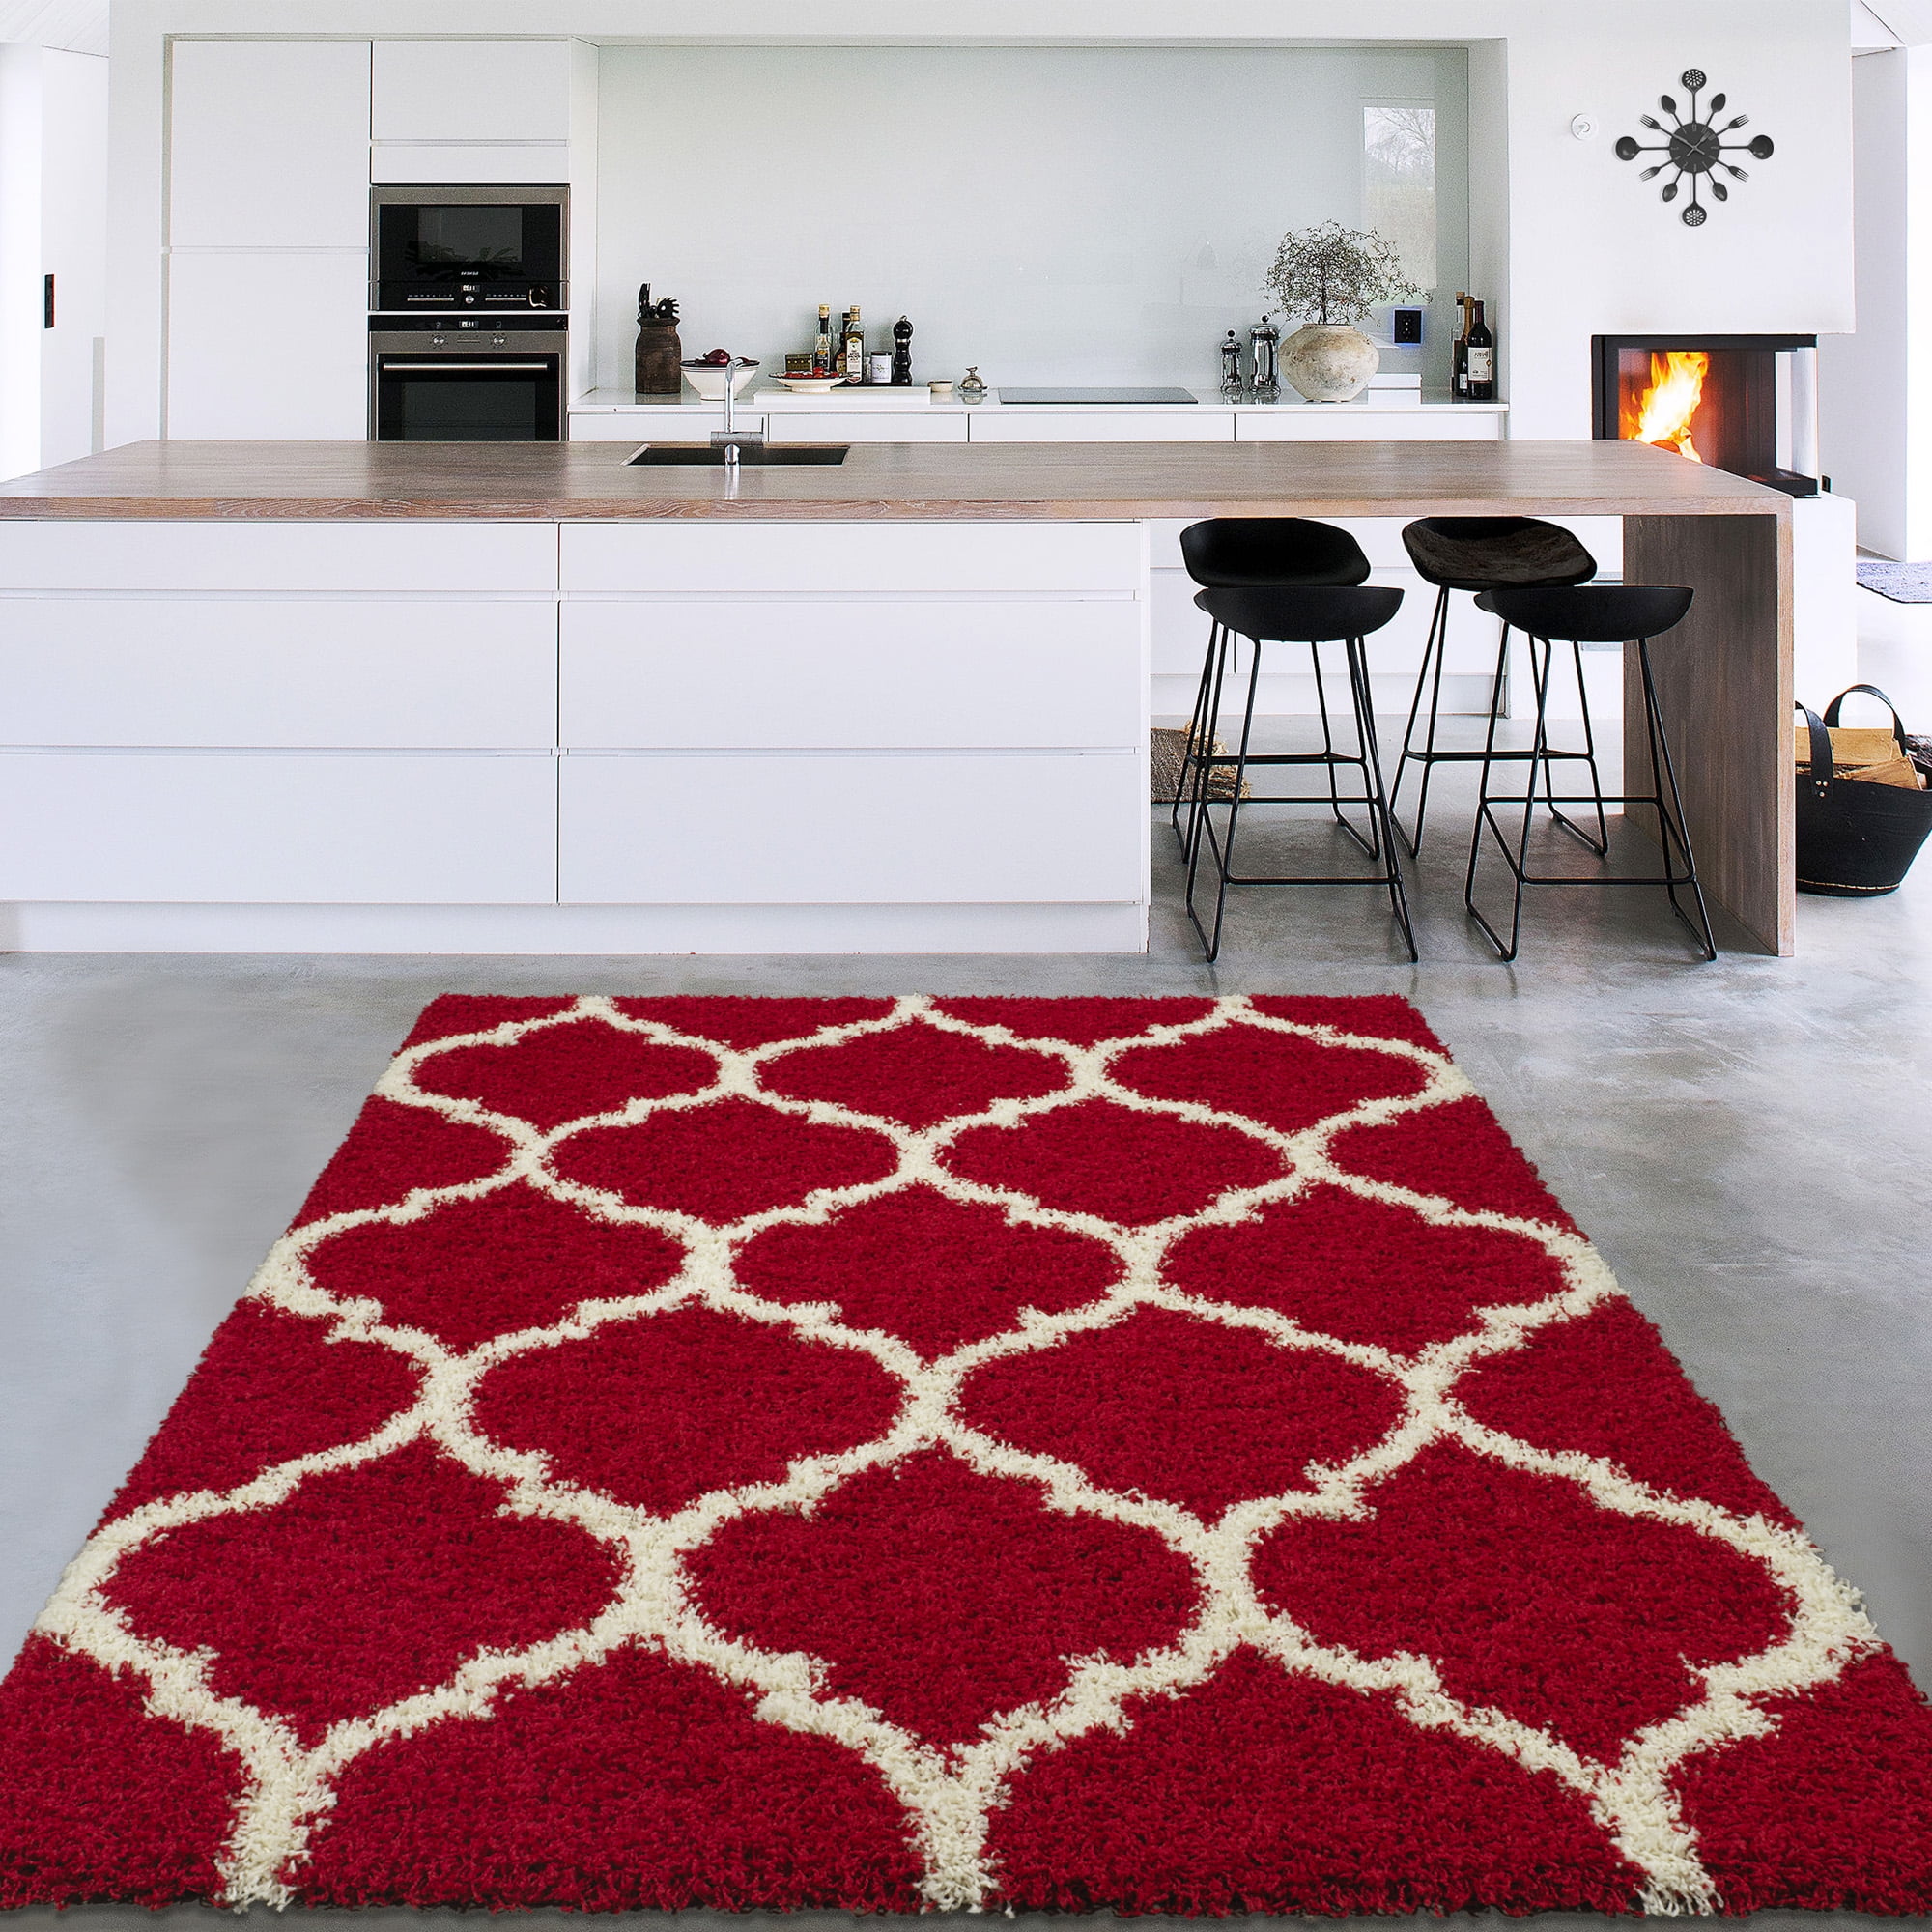 New Collection Contemporary Moroccan Trellis Design Floor Rugs Carpets All Sizes 